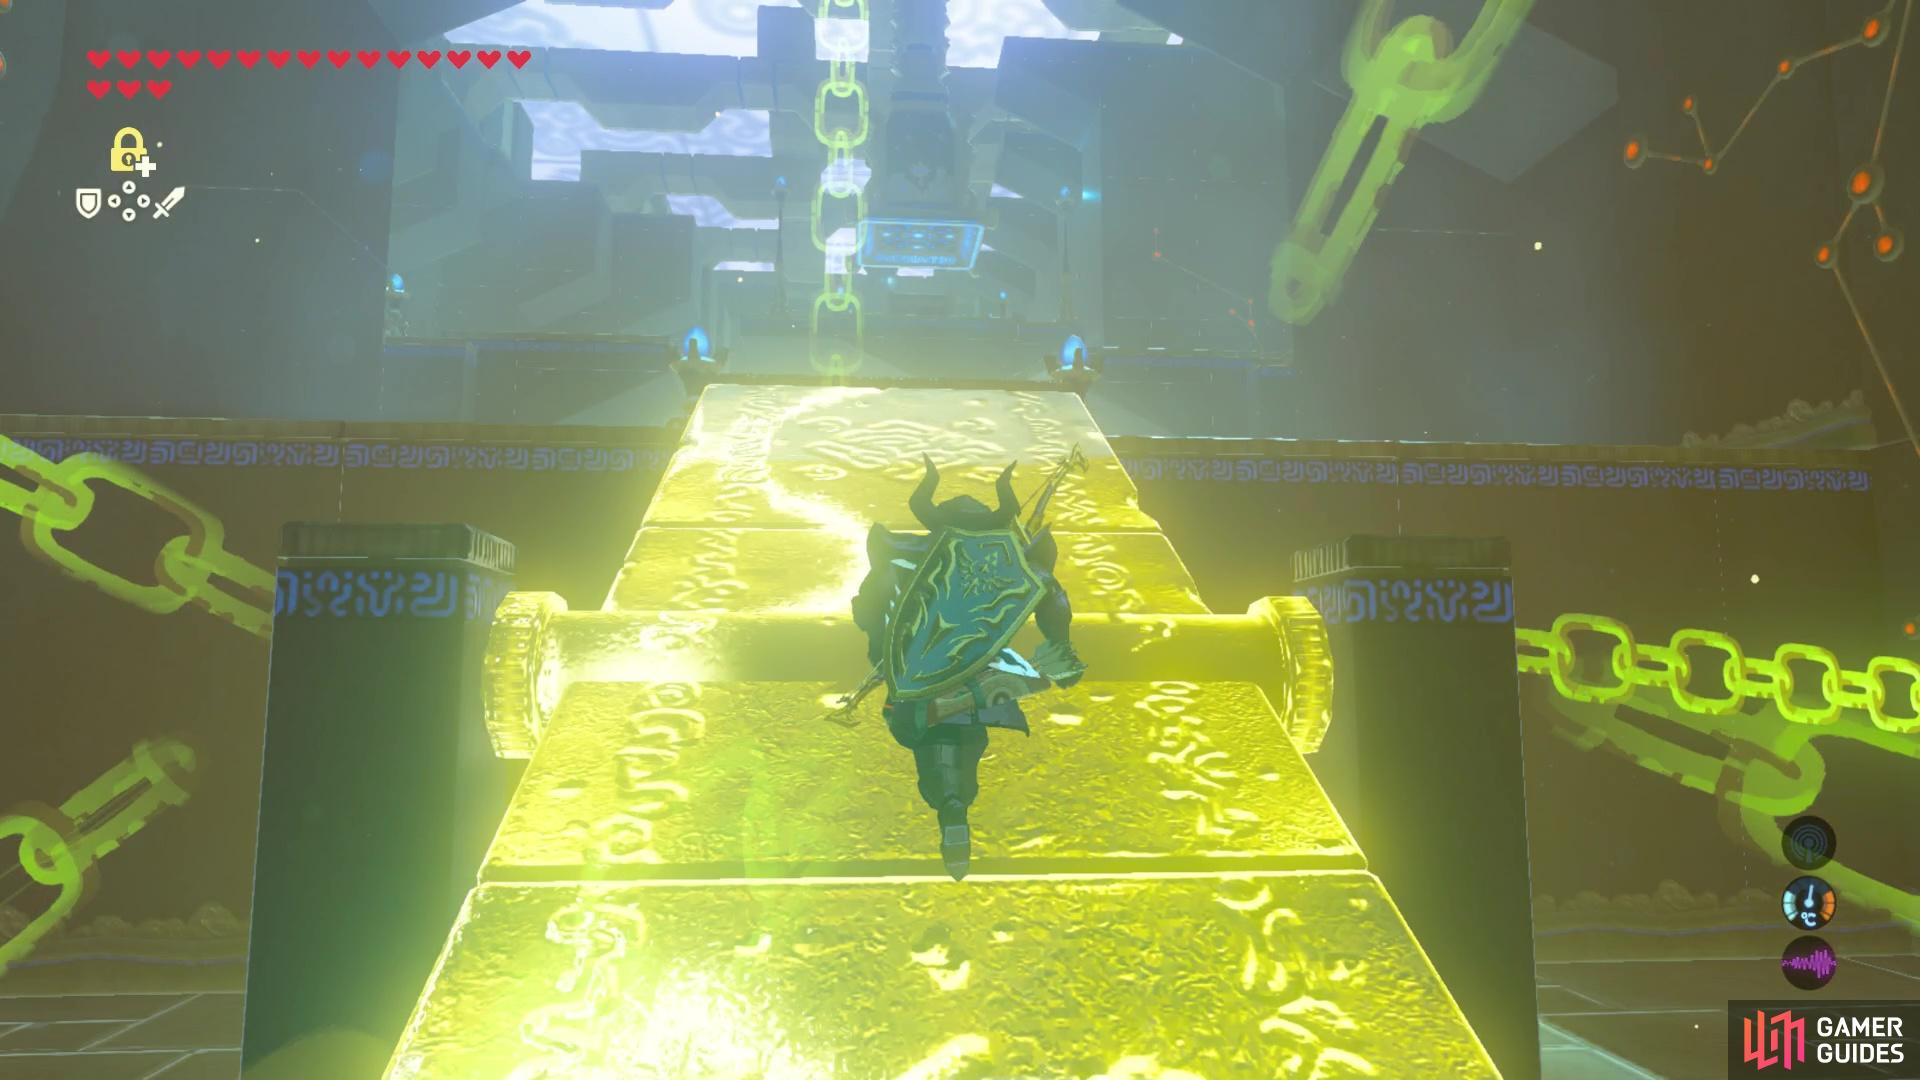 Use Stasis to freeze the seesaws into ramps so you can safely cross them without being affected by the laws of physics!